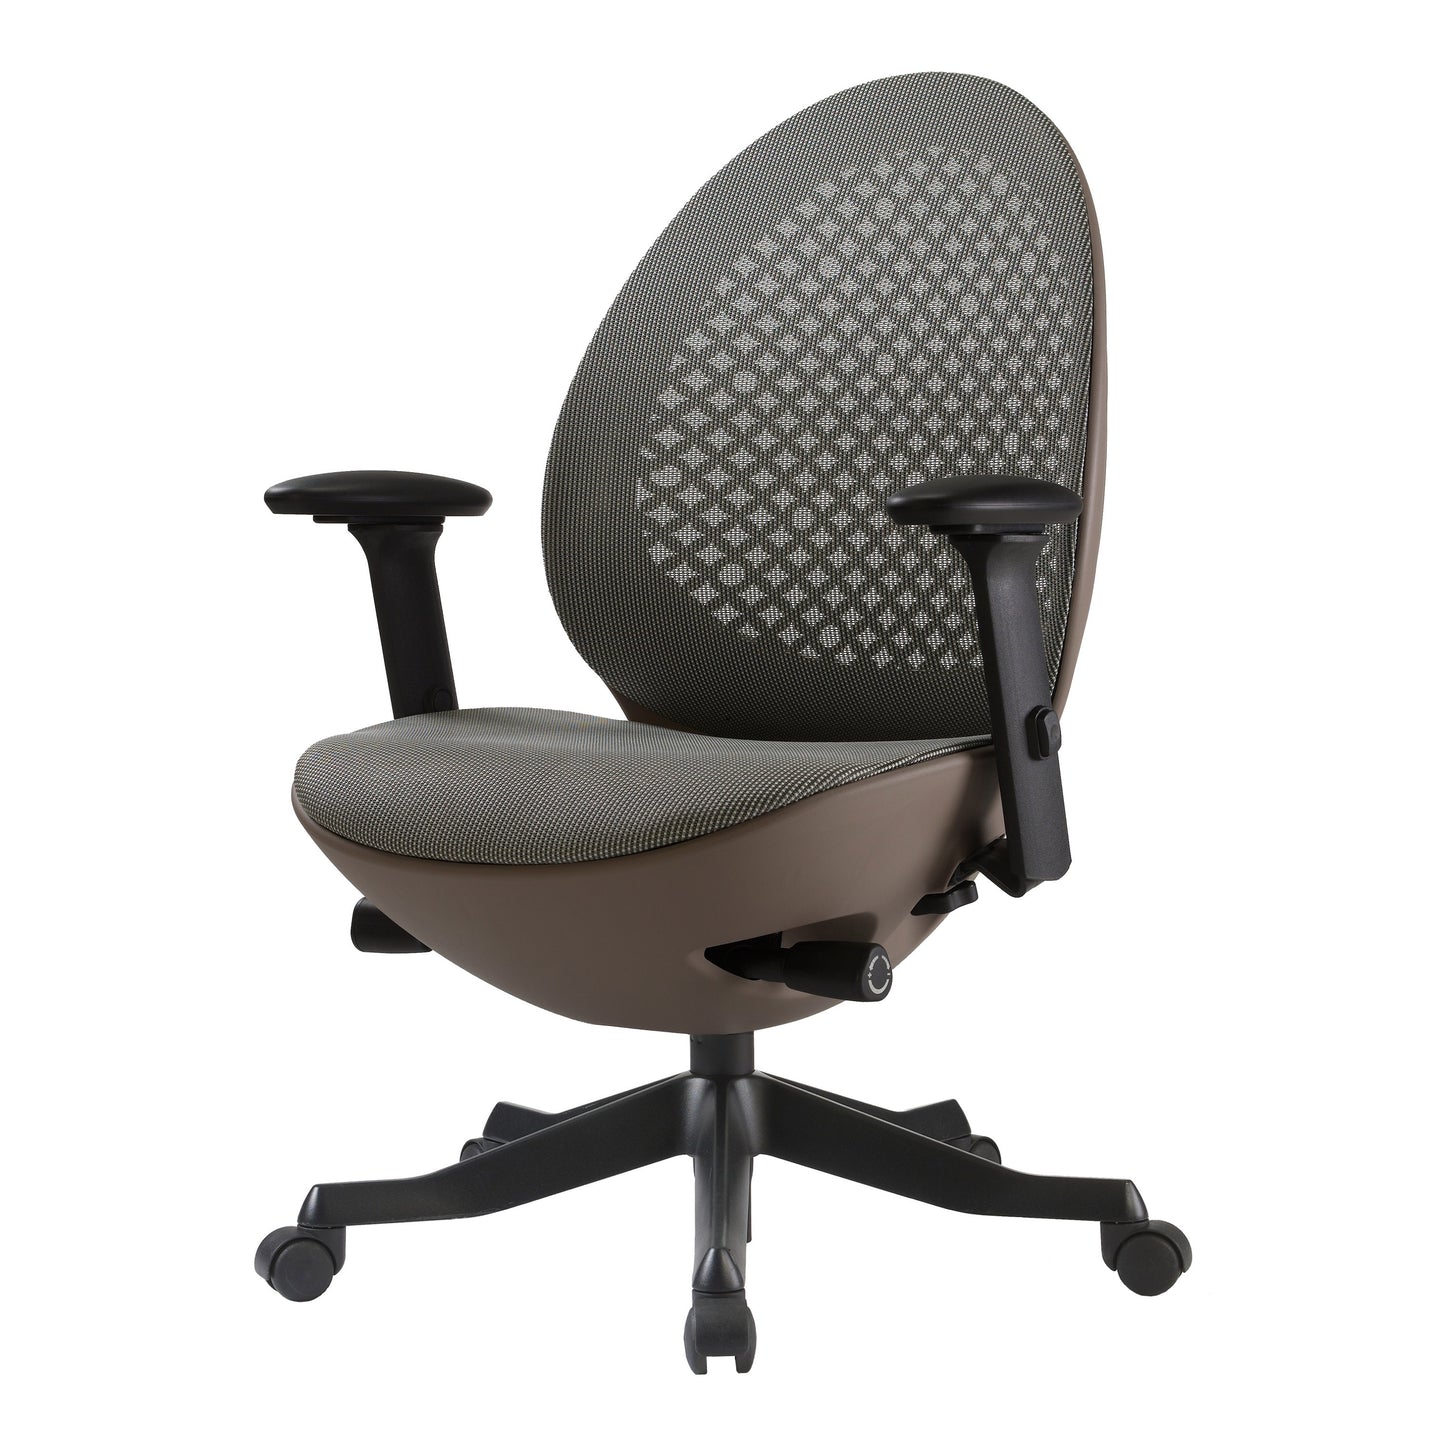 Deco LUX Executive Office Chair, Taupe